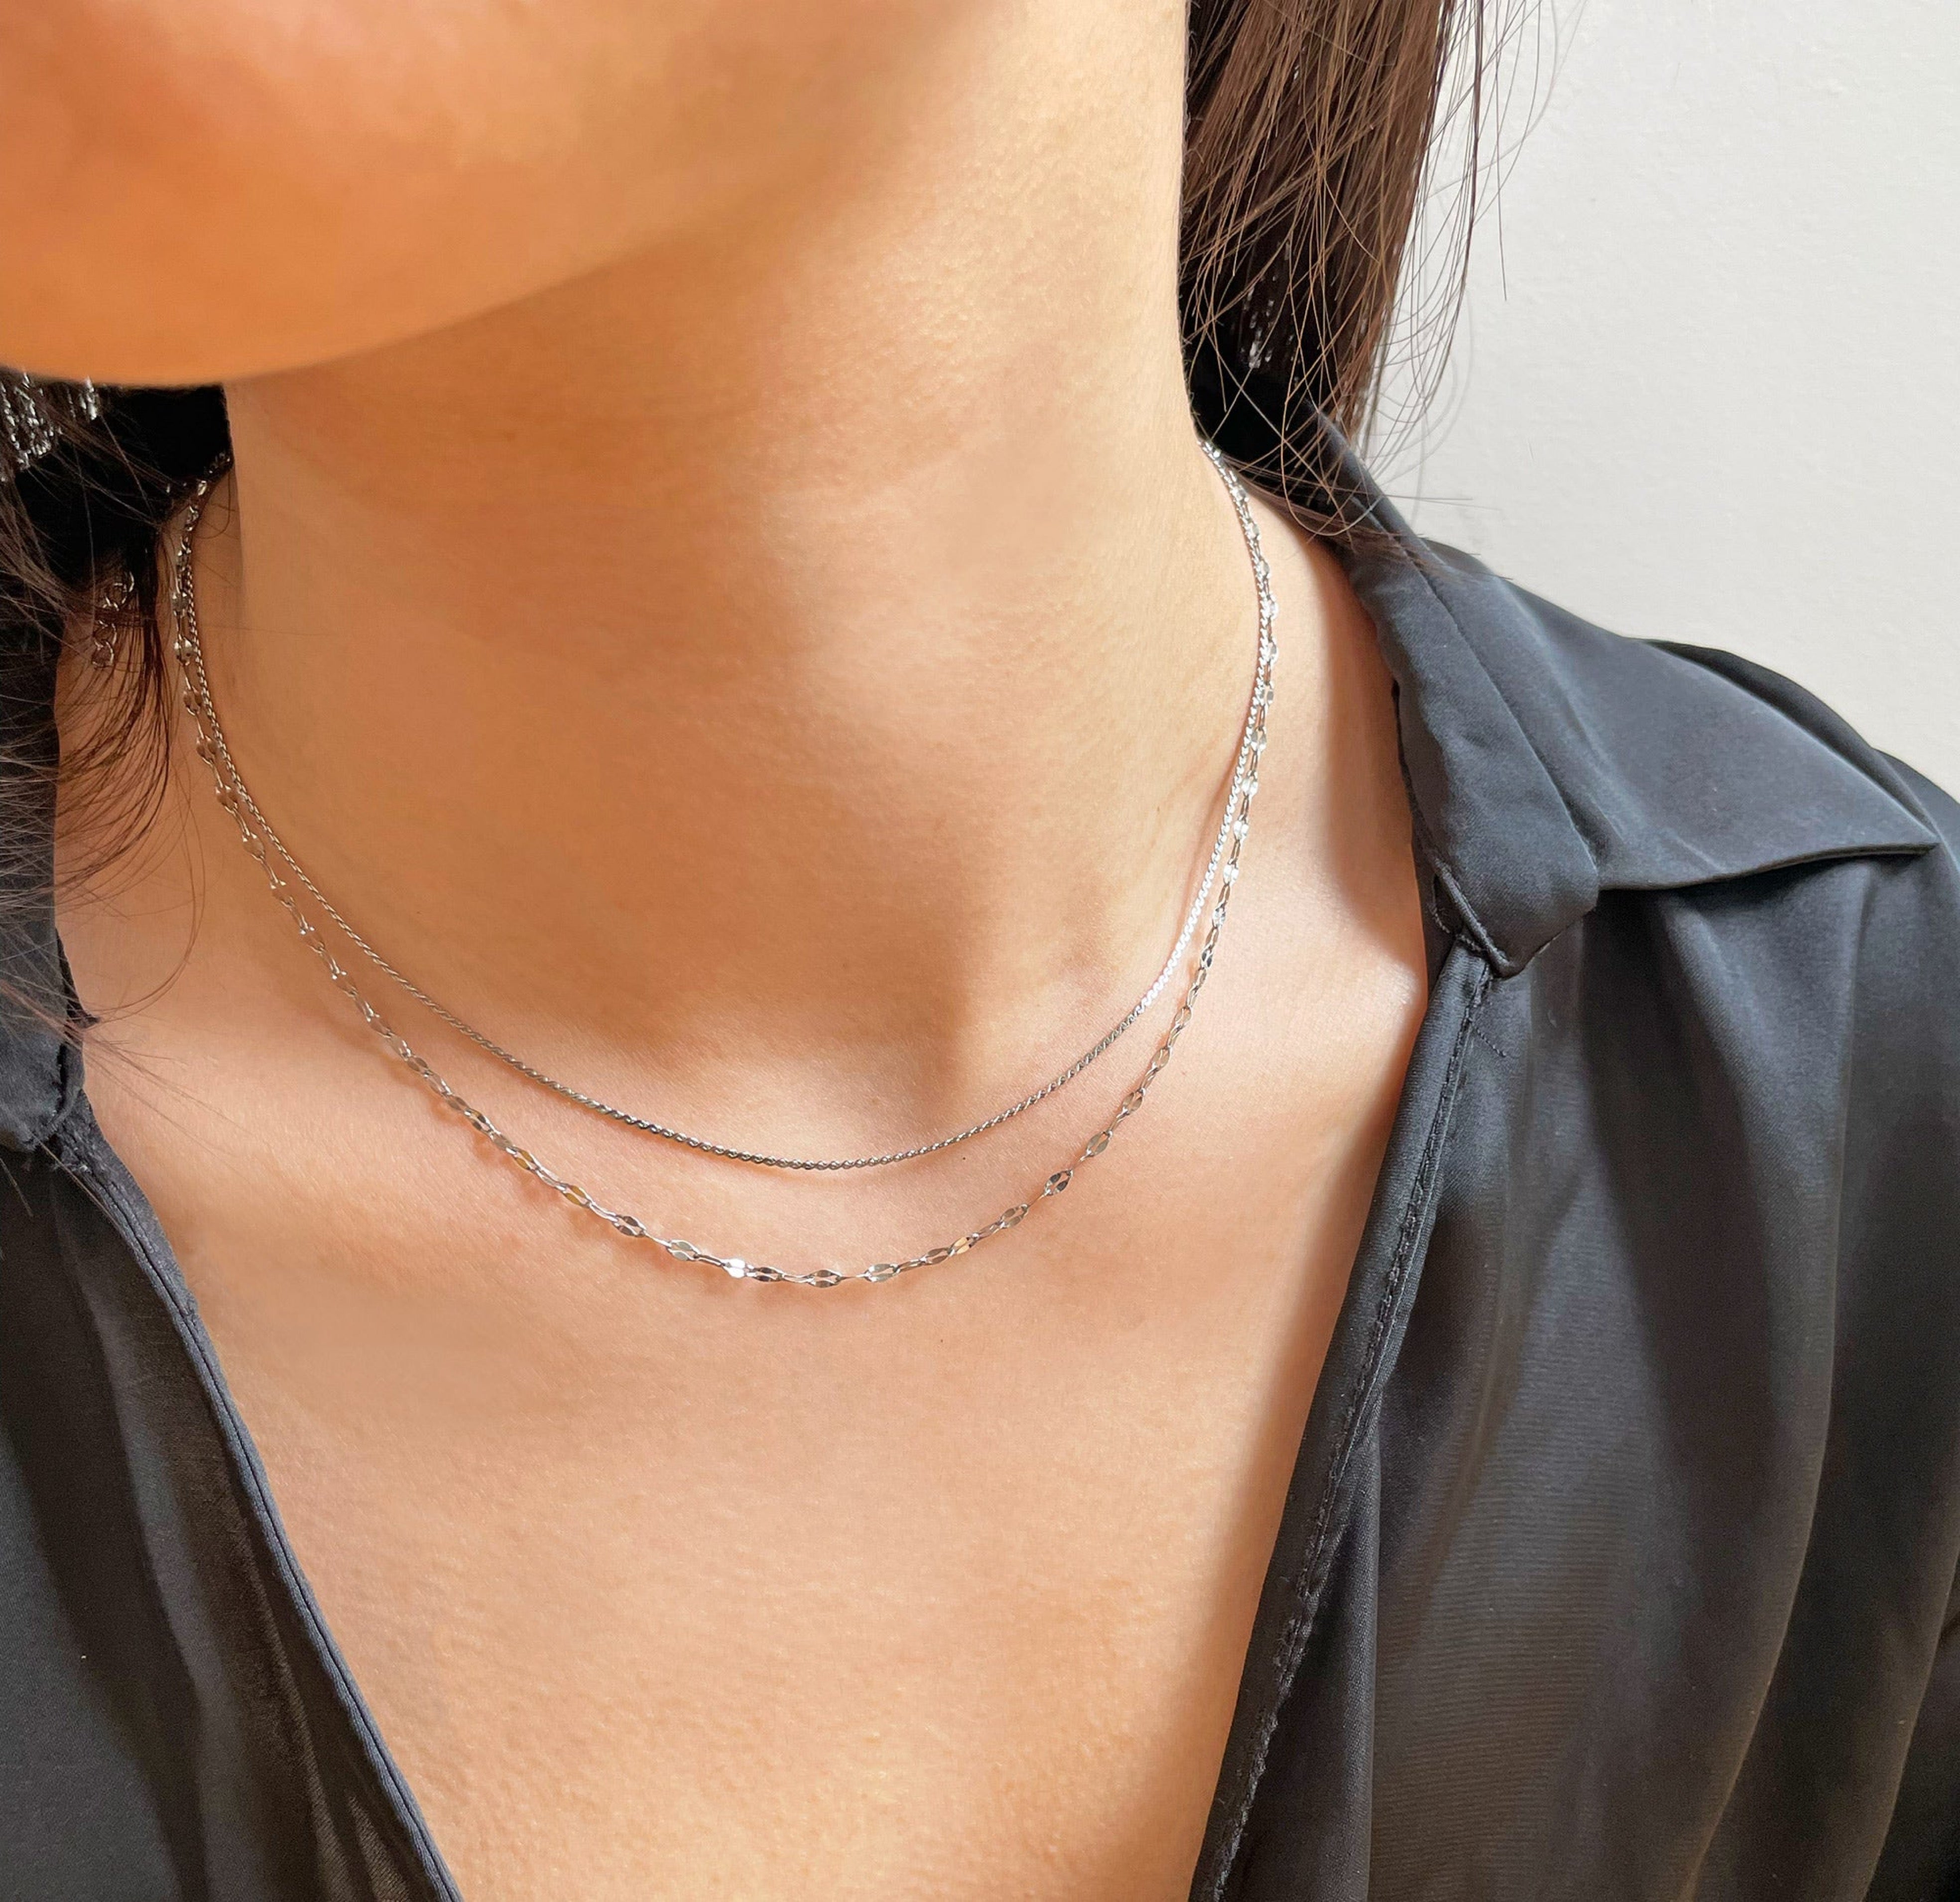 silver dainty lace chain necklace waterproof jewelry